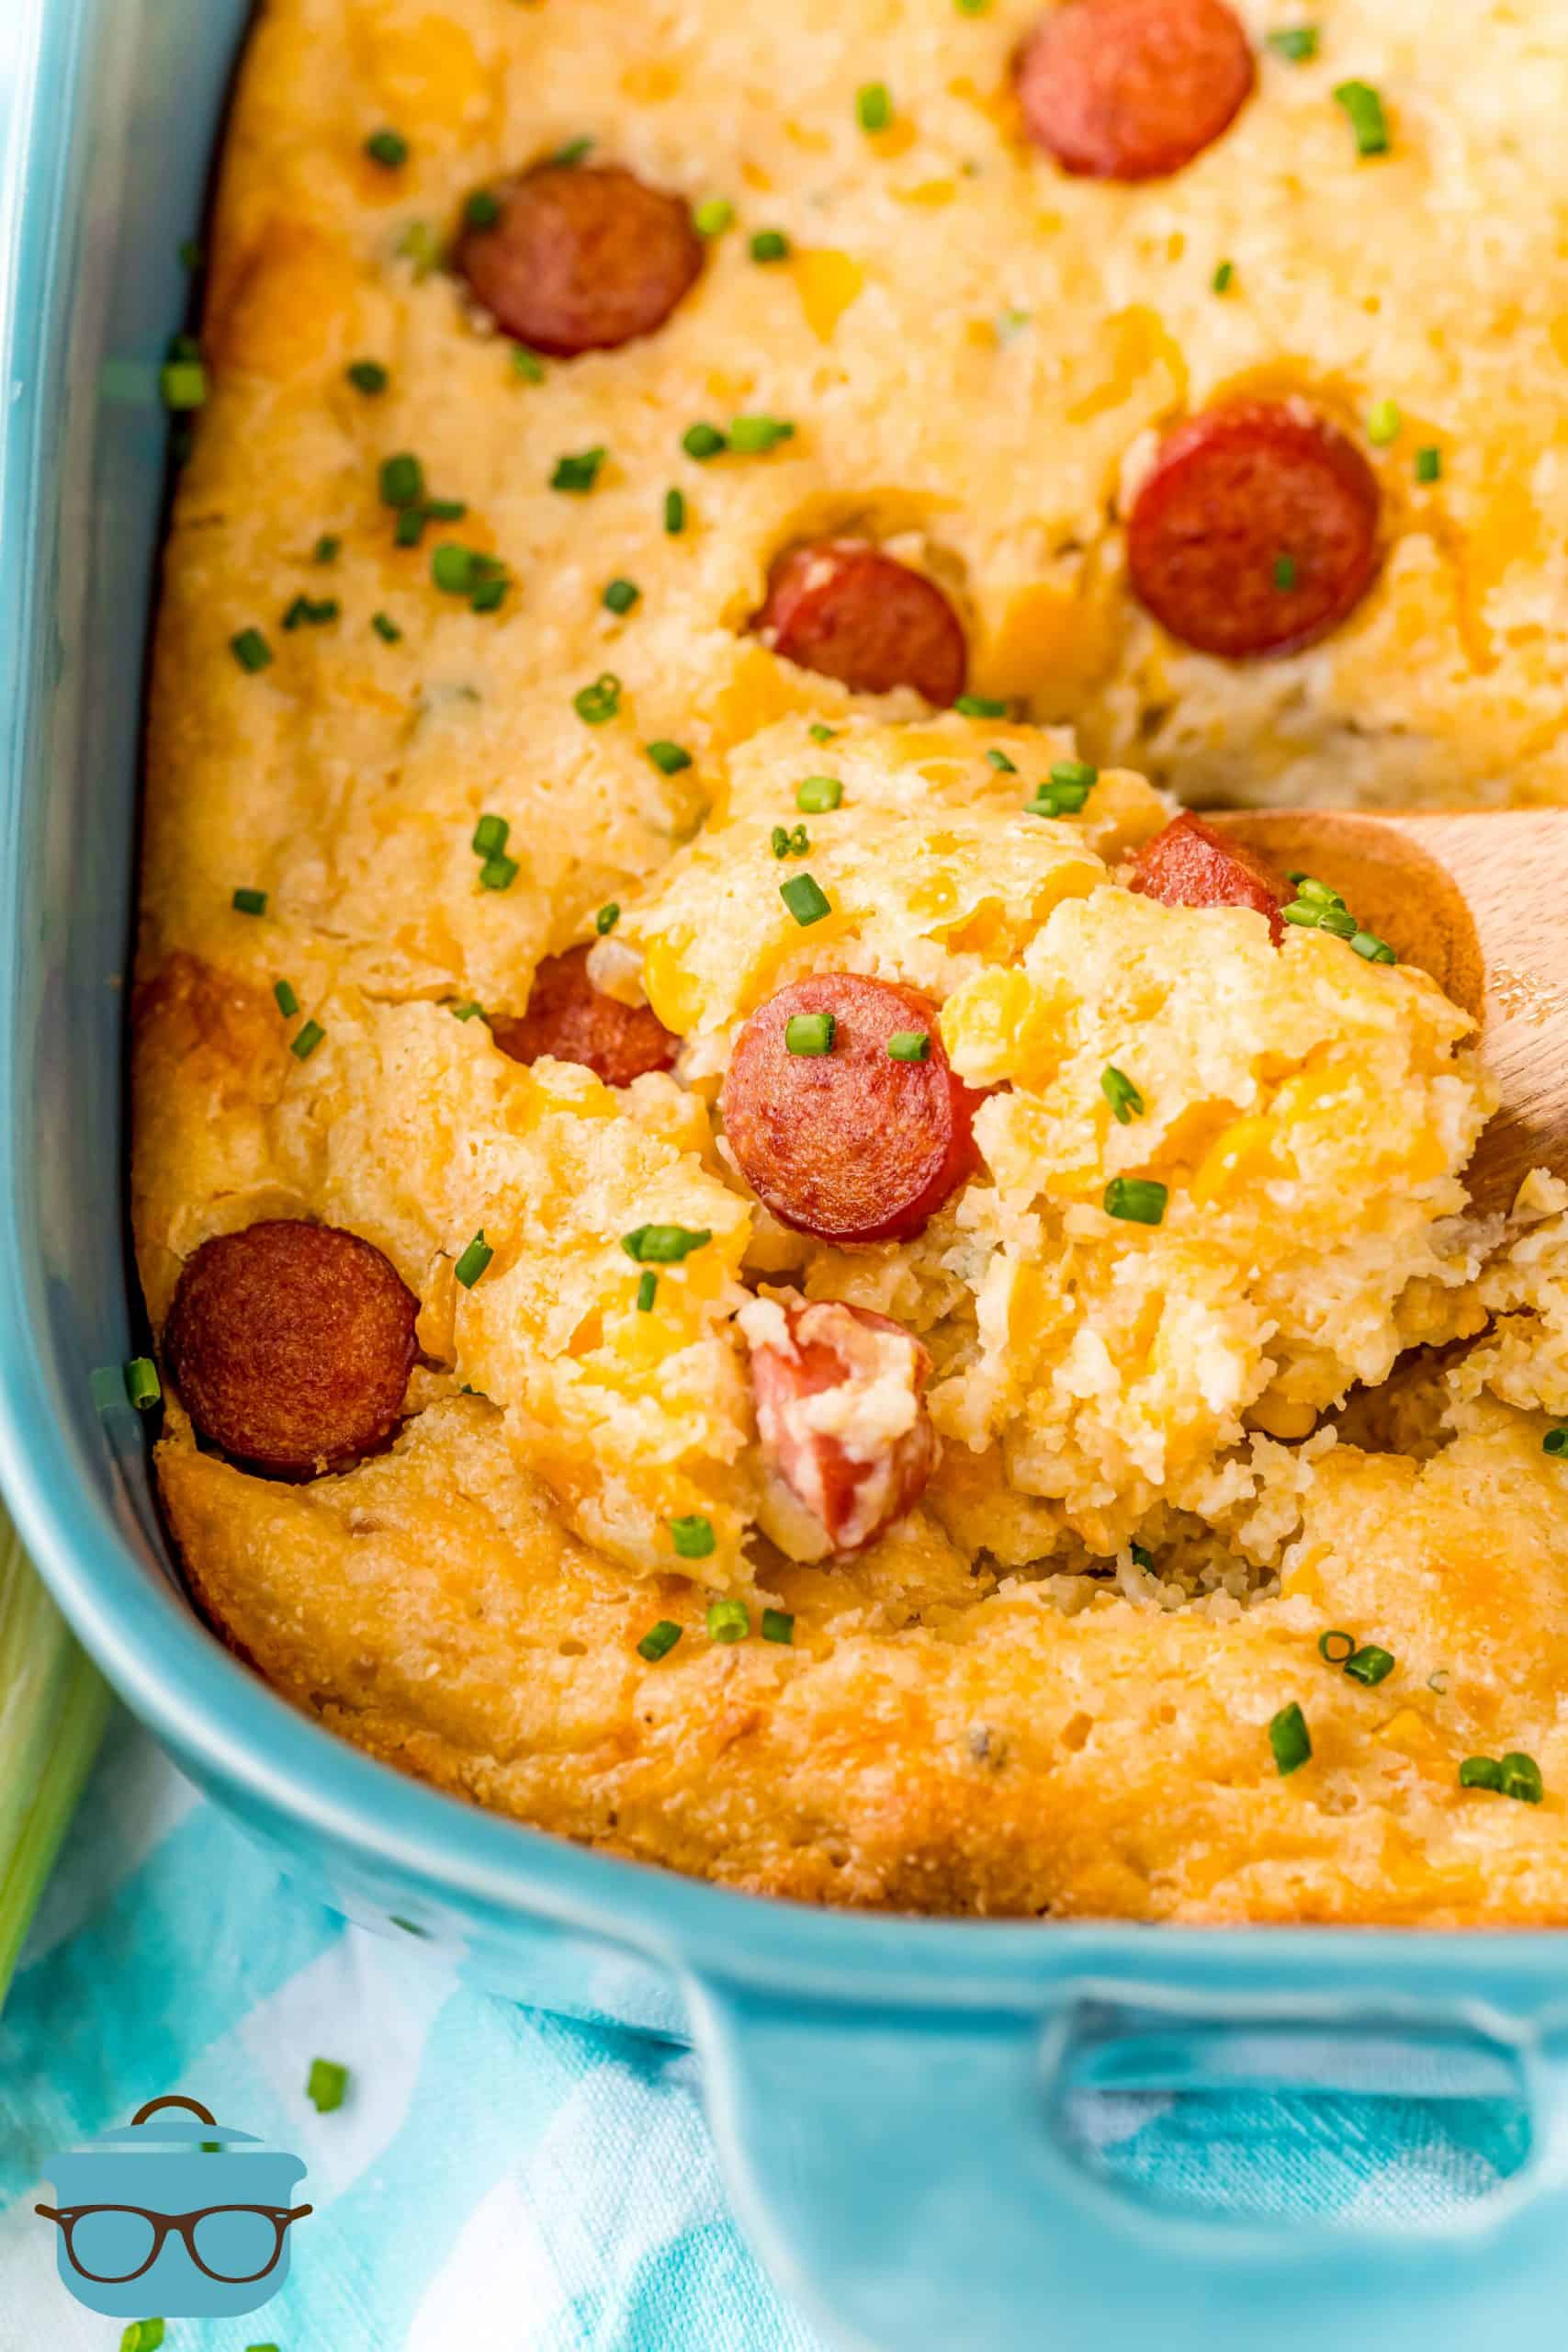 HOT DOG CORN CASSEROLE SHOWN IN A TEAL BAKING DISH WITH A WOODEN SPOON SCOOPING OUT A SERVING.